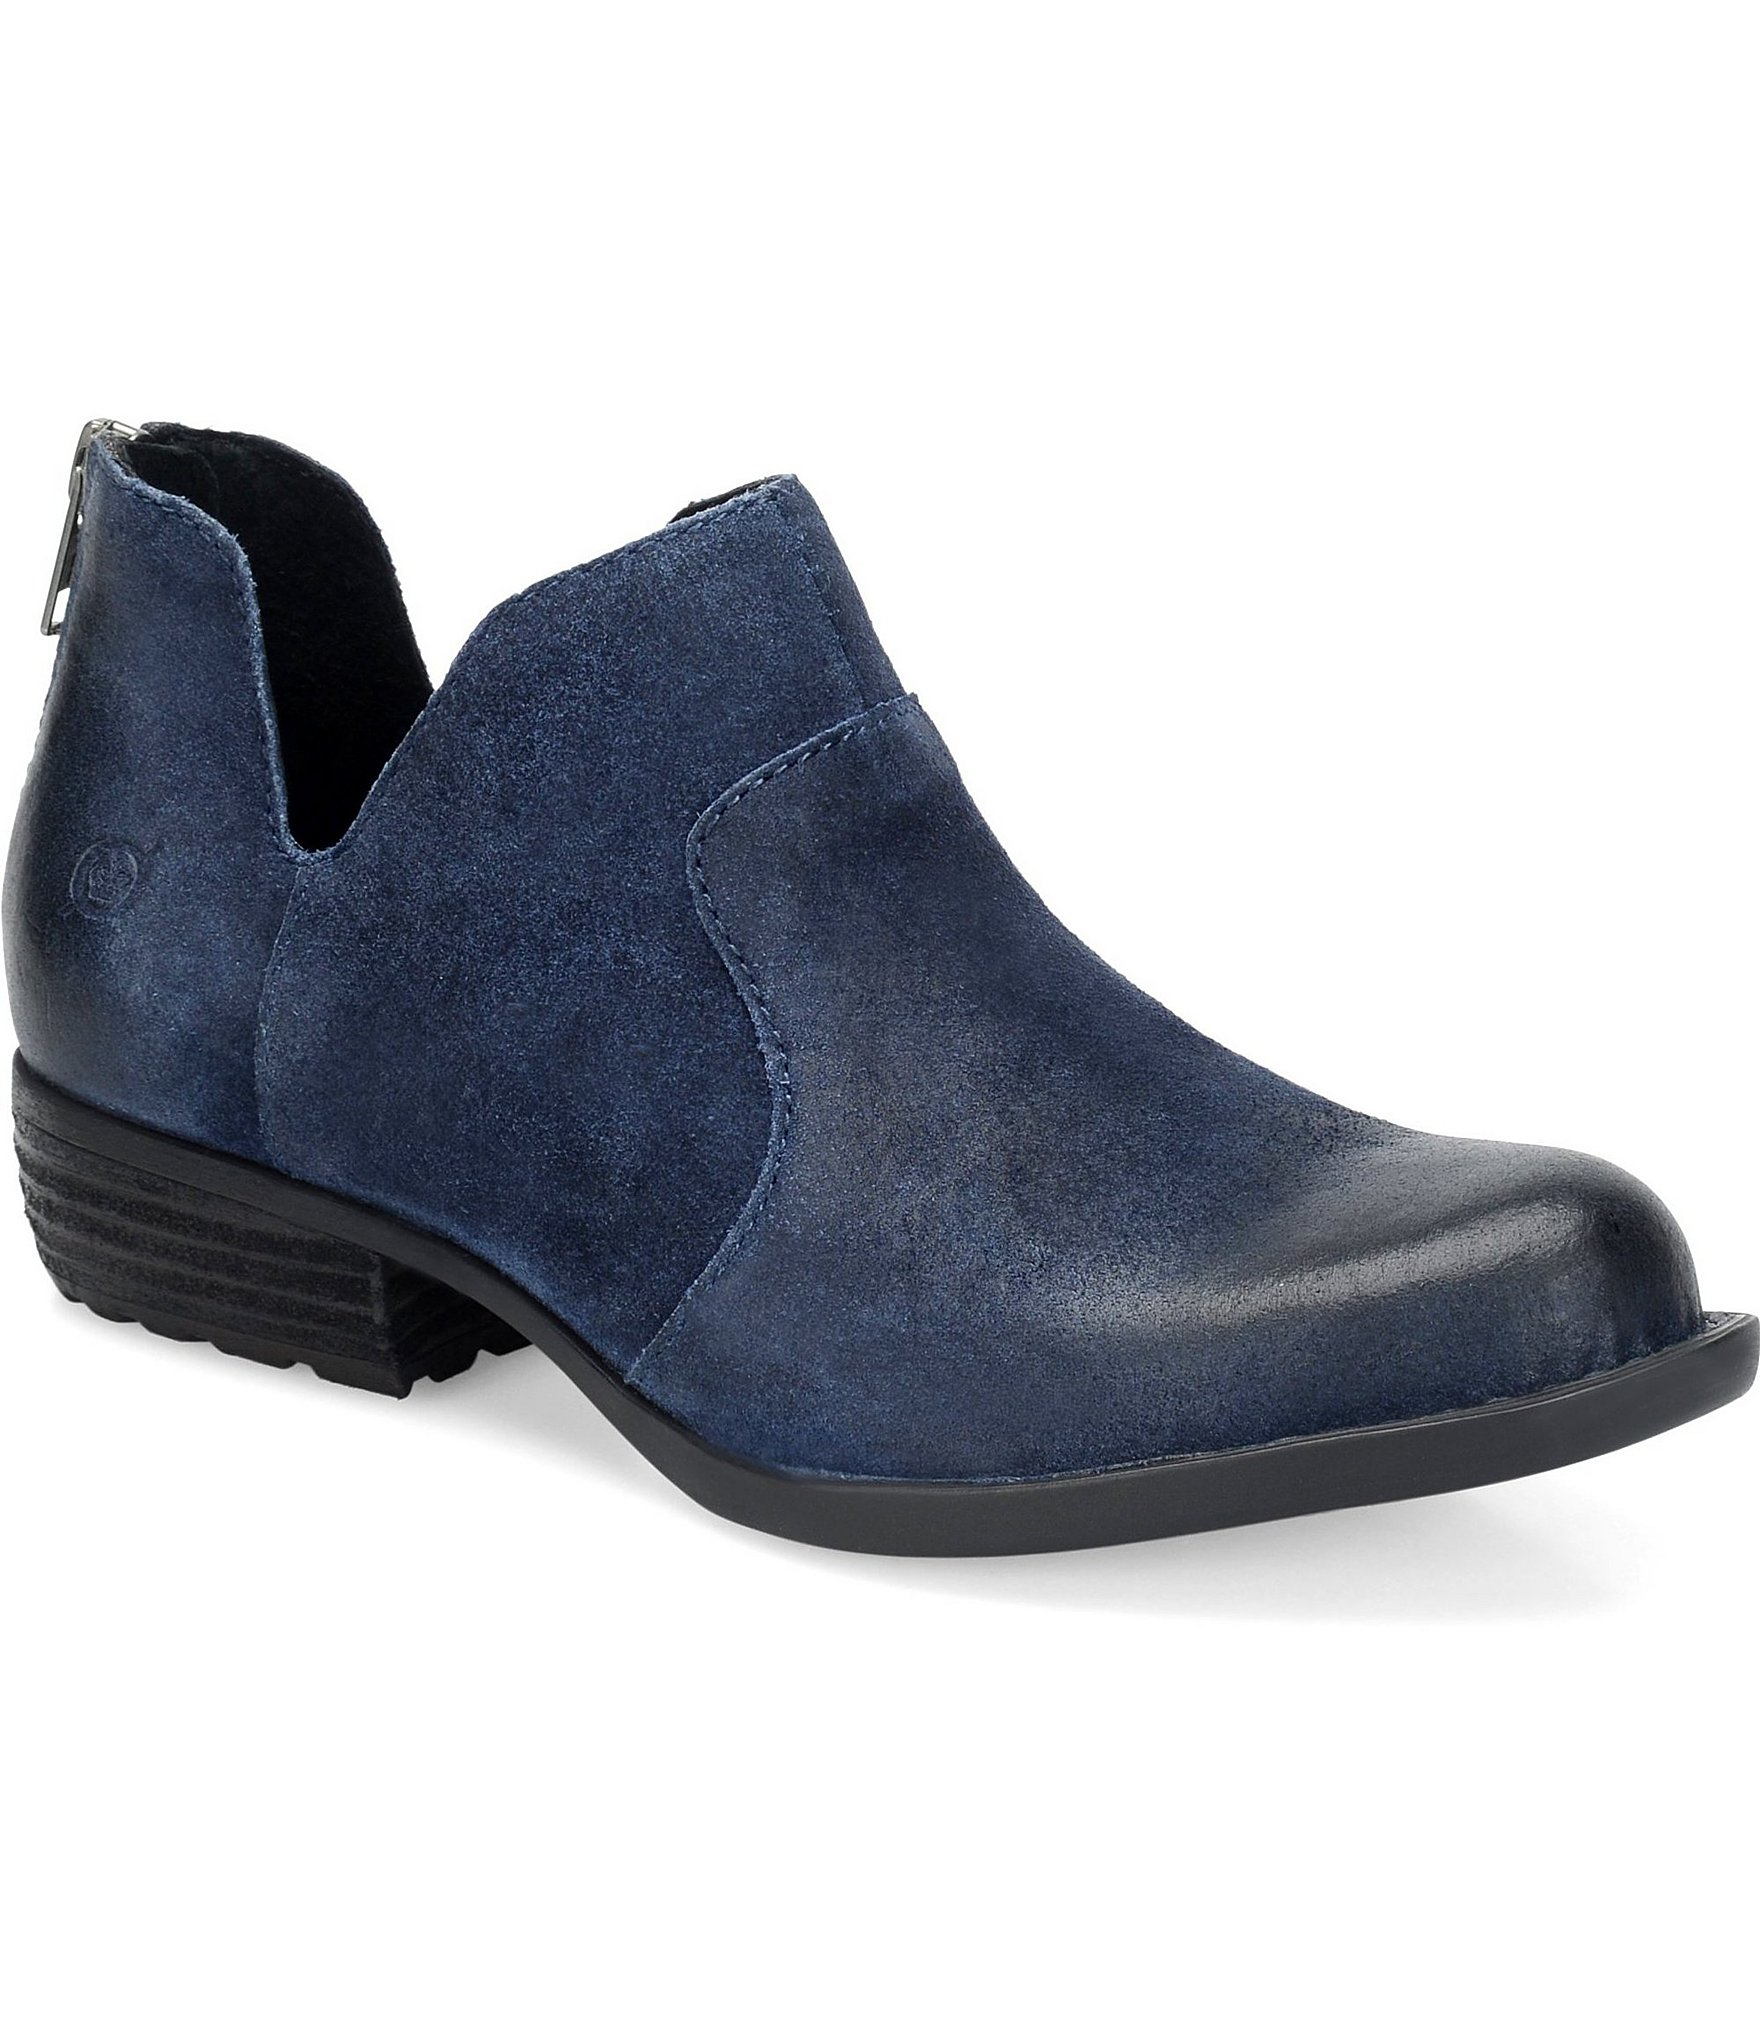 Lyst - Born Kerri Leather Ankle Boots in Blue